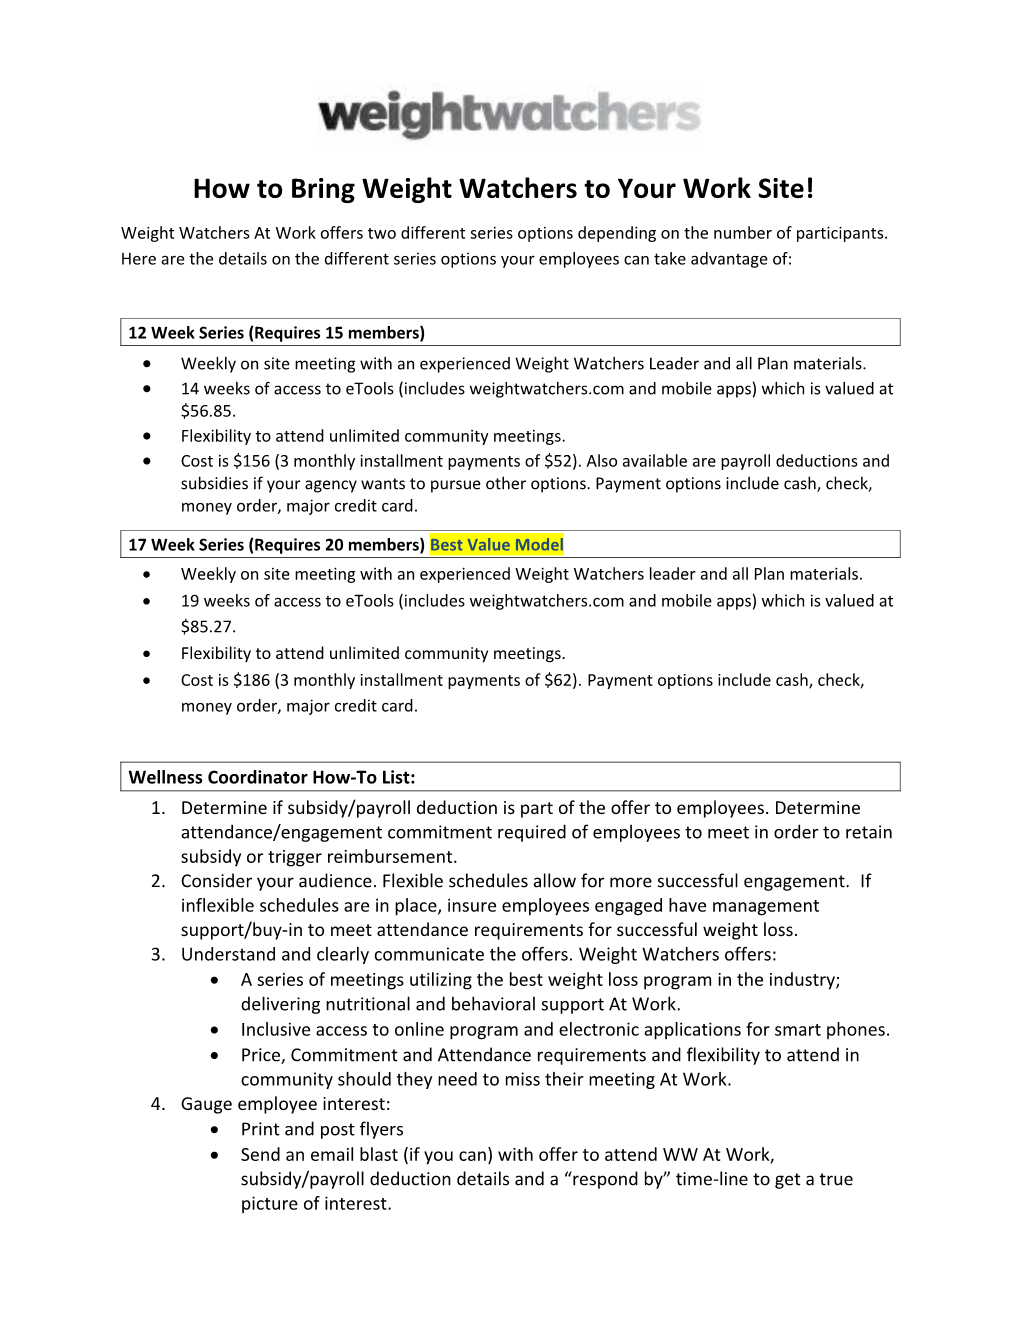 How to Bring Weight Watchers to Your Work Site!